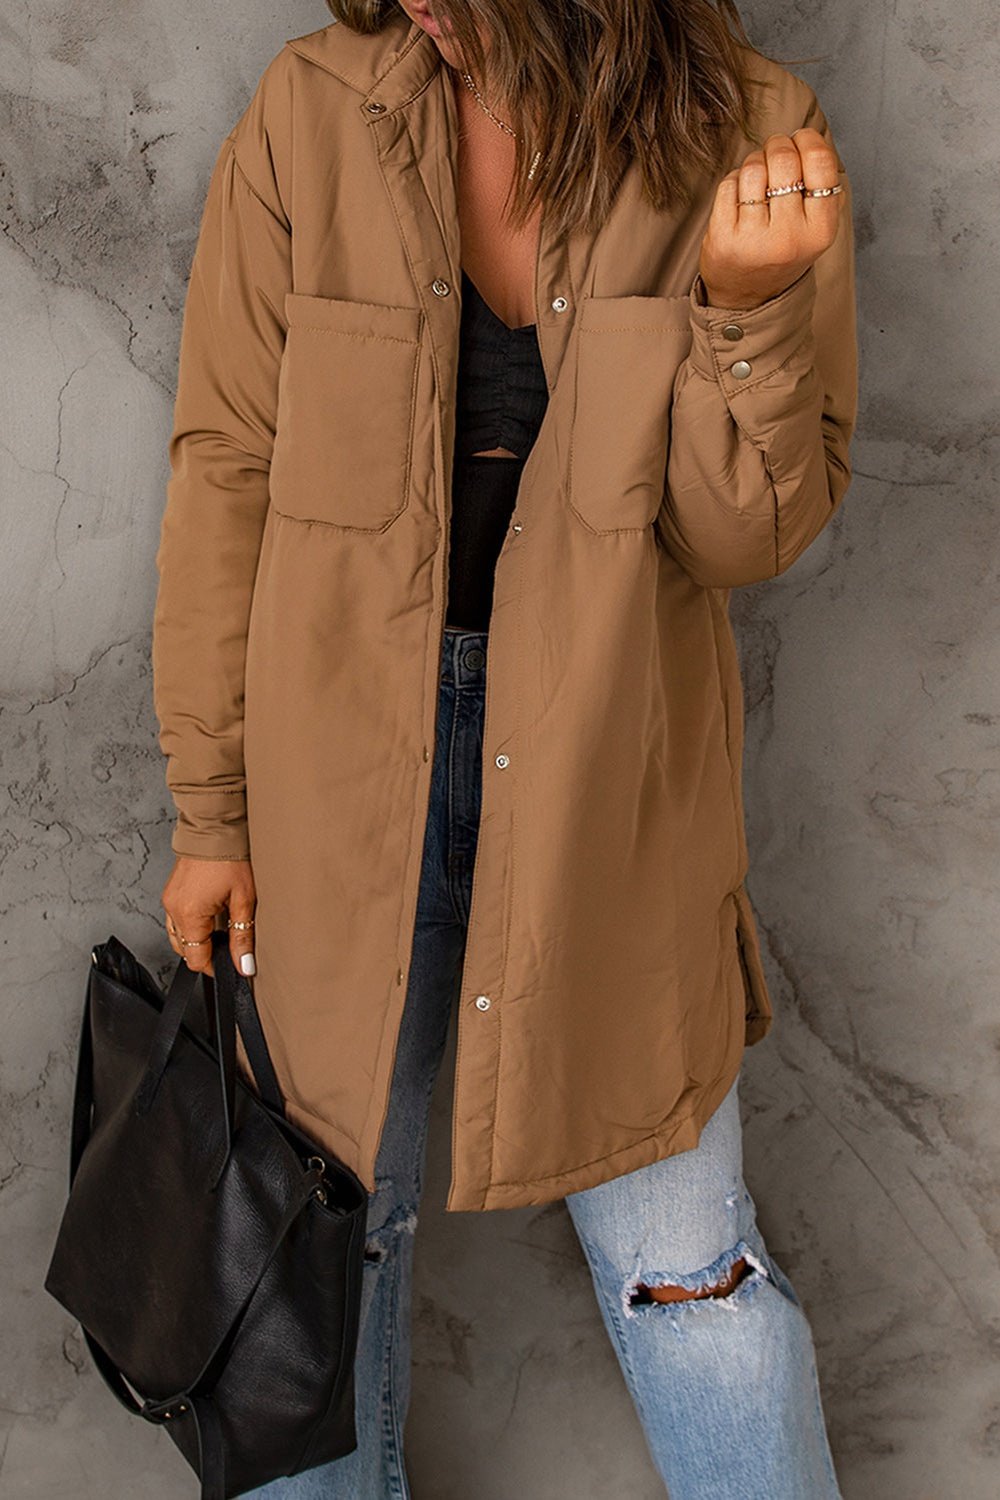 Snap Down Side Slit Jacket with Pockets - Jackets - FITGGINS